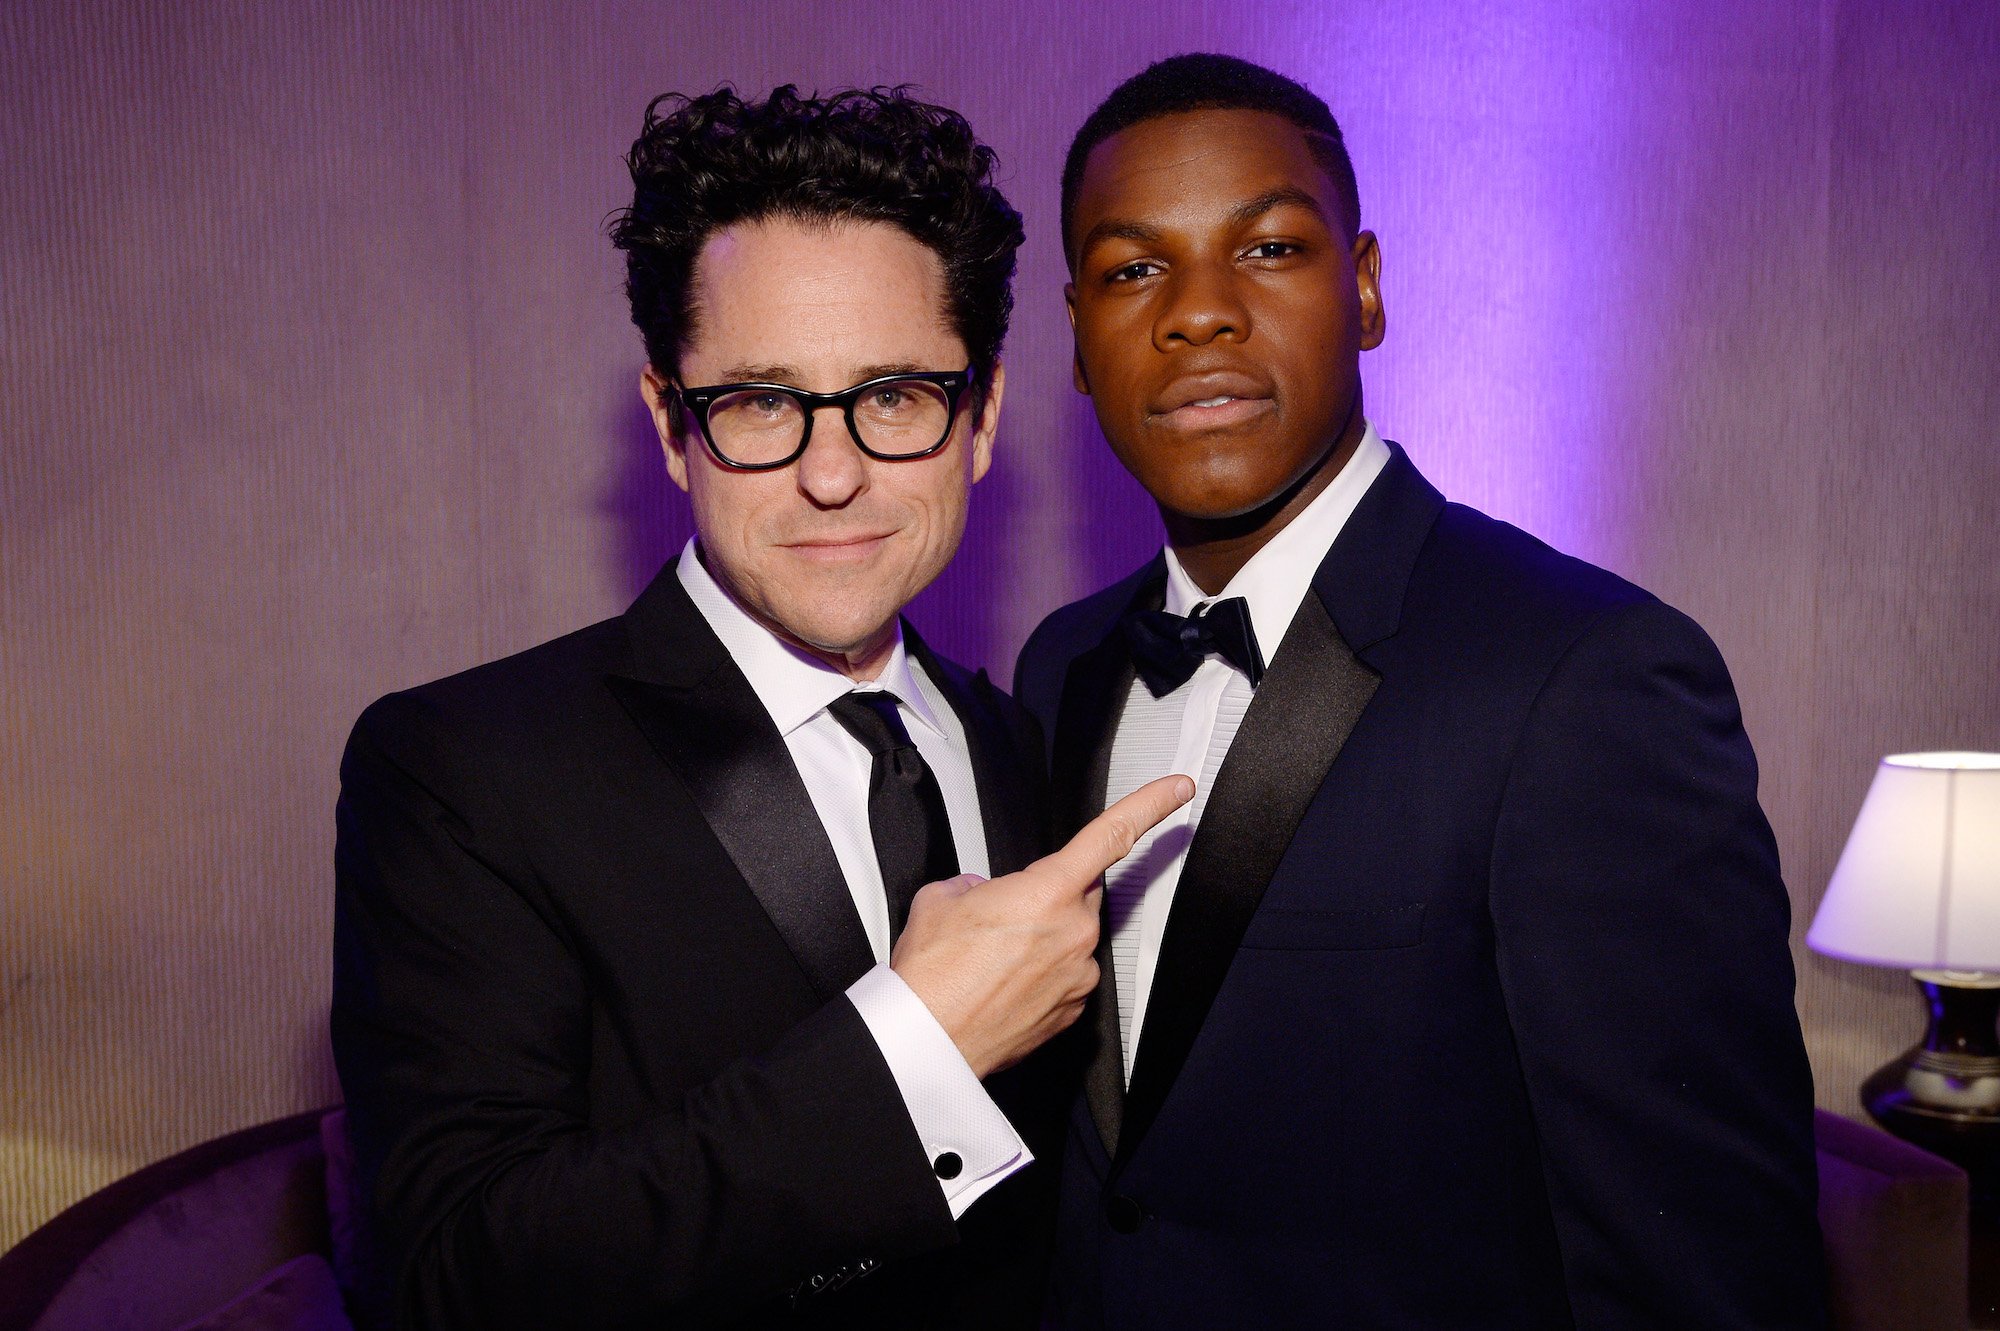 John Boyega Said J.J. Abrams ‘Wasn’t Even Supposed To Come Back and Try To Save Your Sh*t,’ Referring to ‘Star Wars: The Rise of Skywalker’